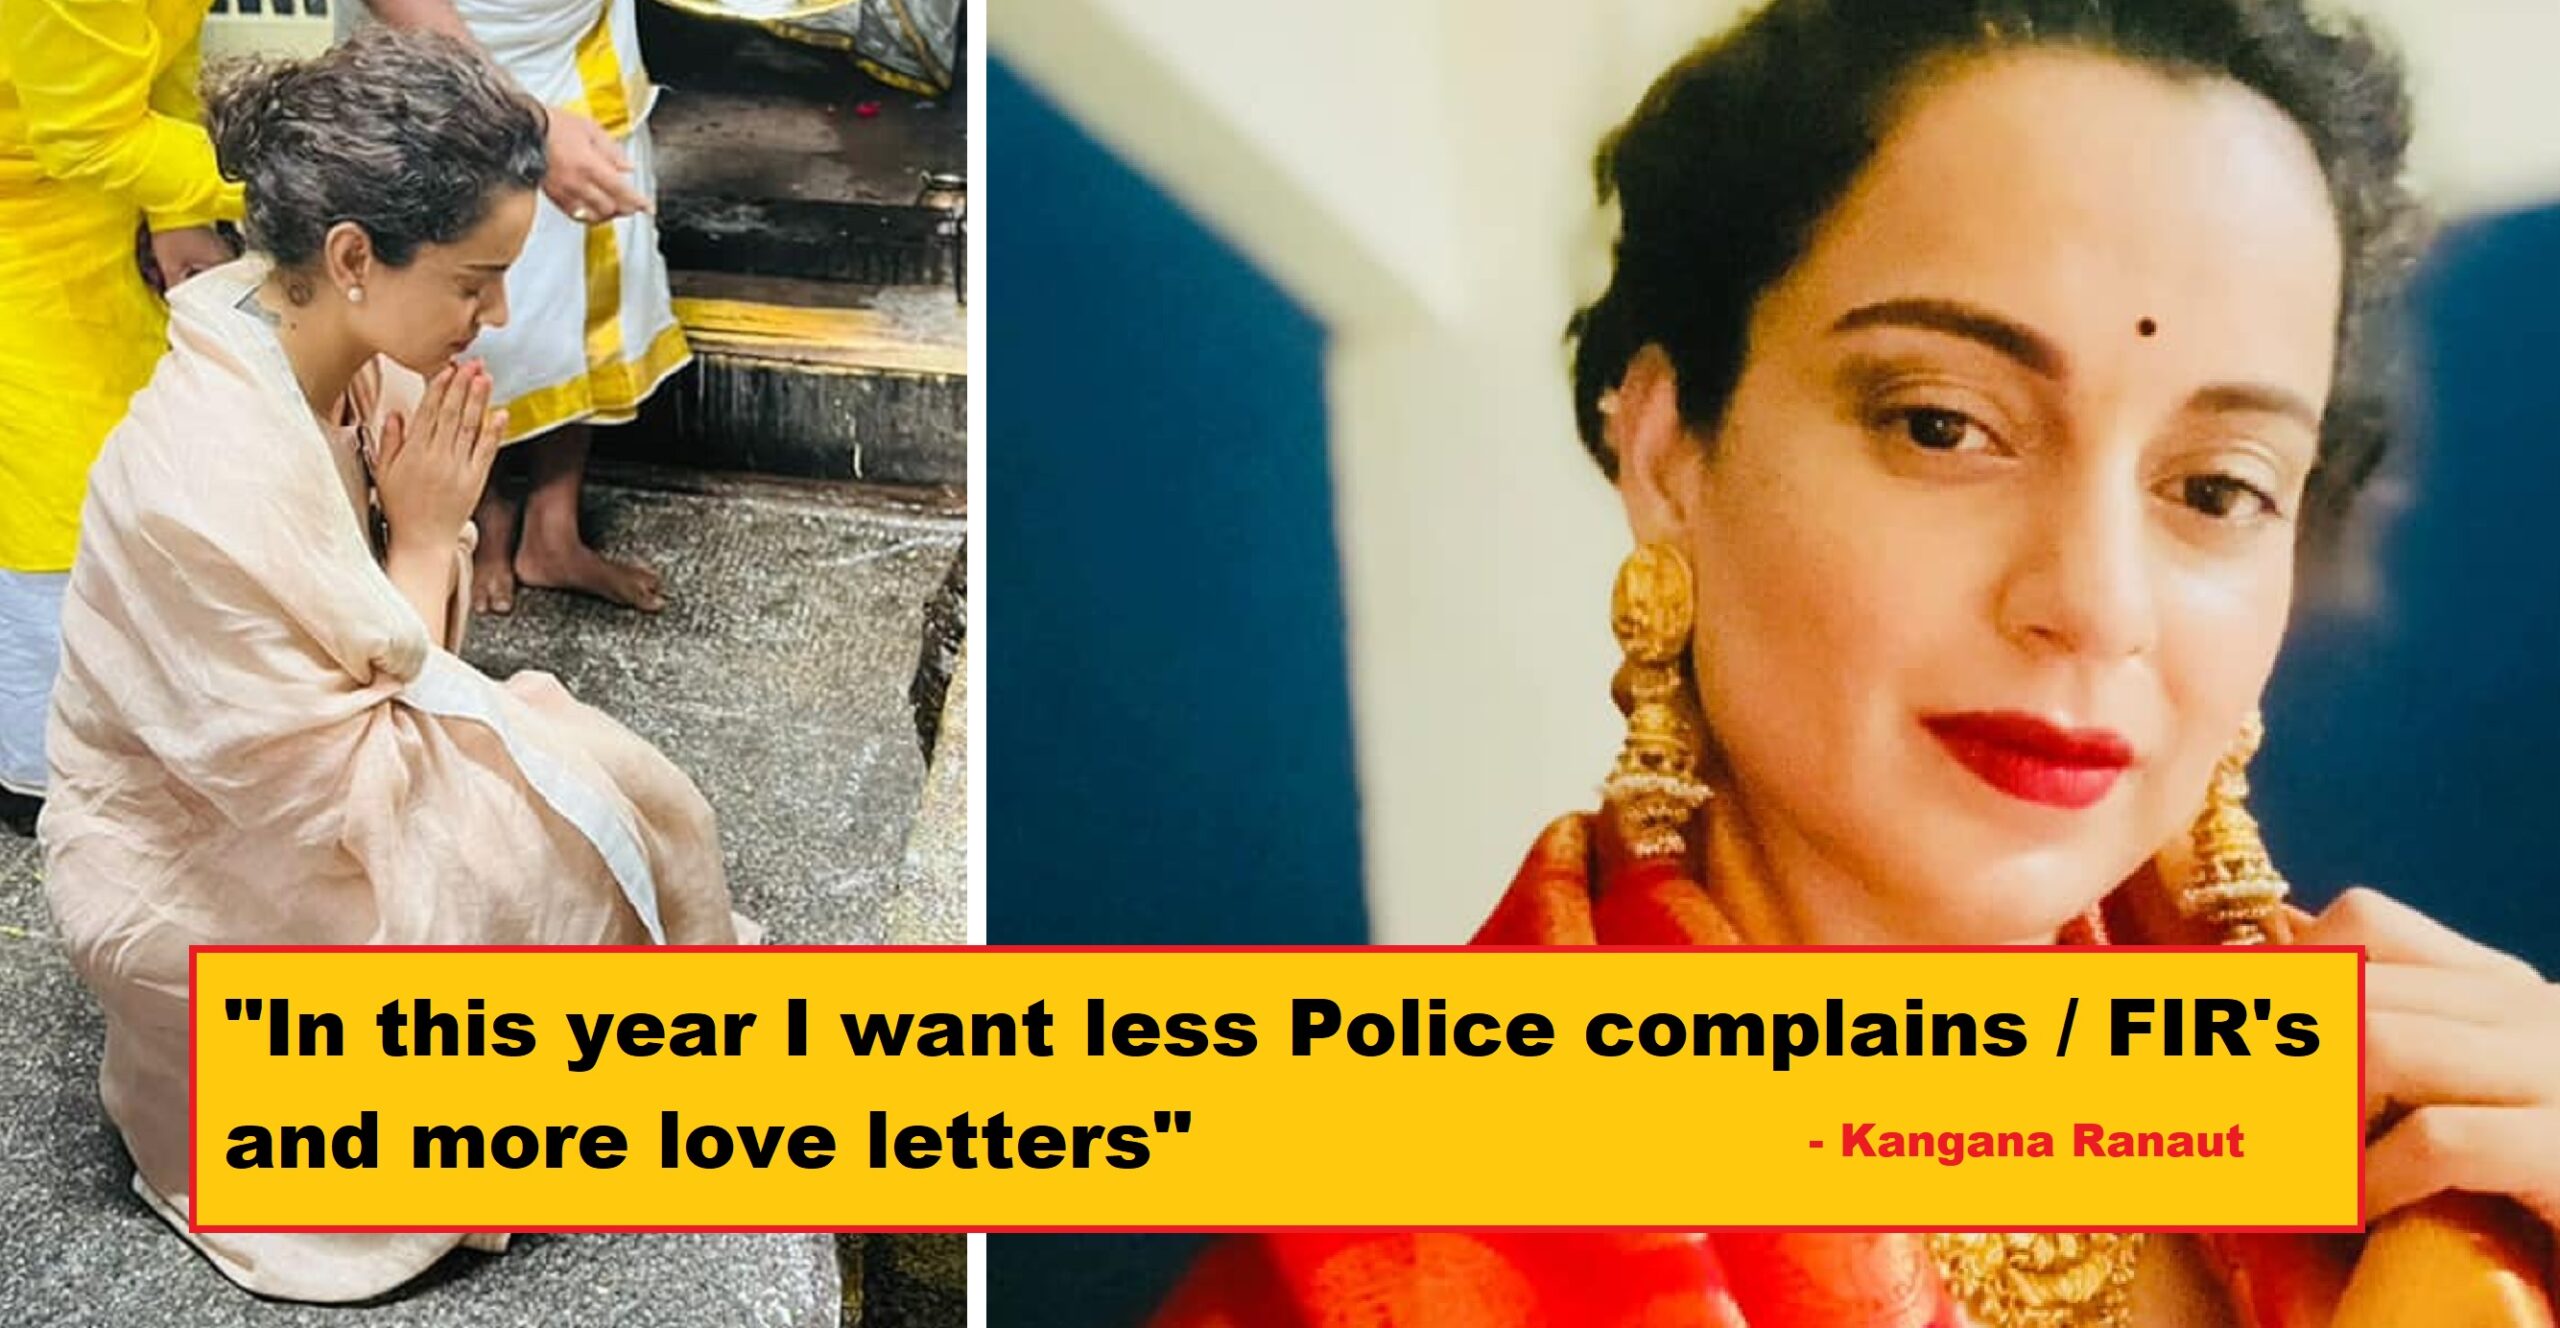 Kangana Ranaut Starts Her New Year On A Positive Note: “I want less FIR’s & more love letters”